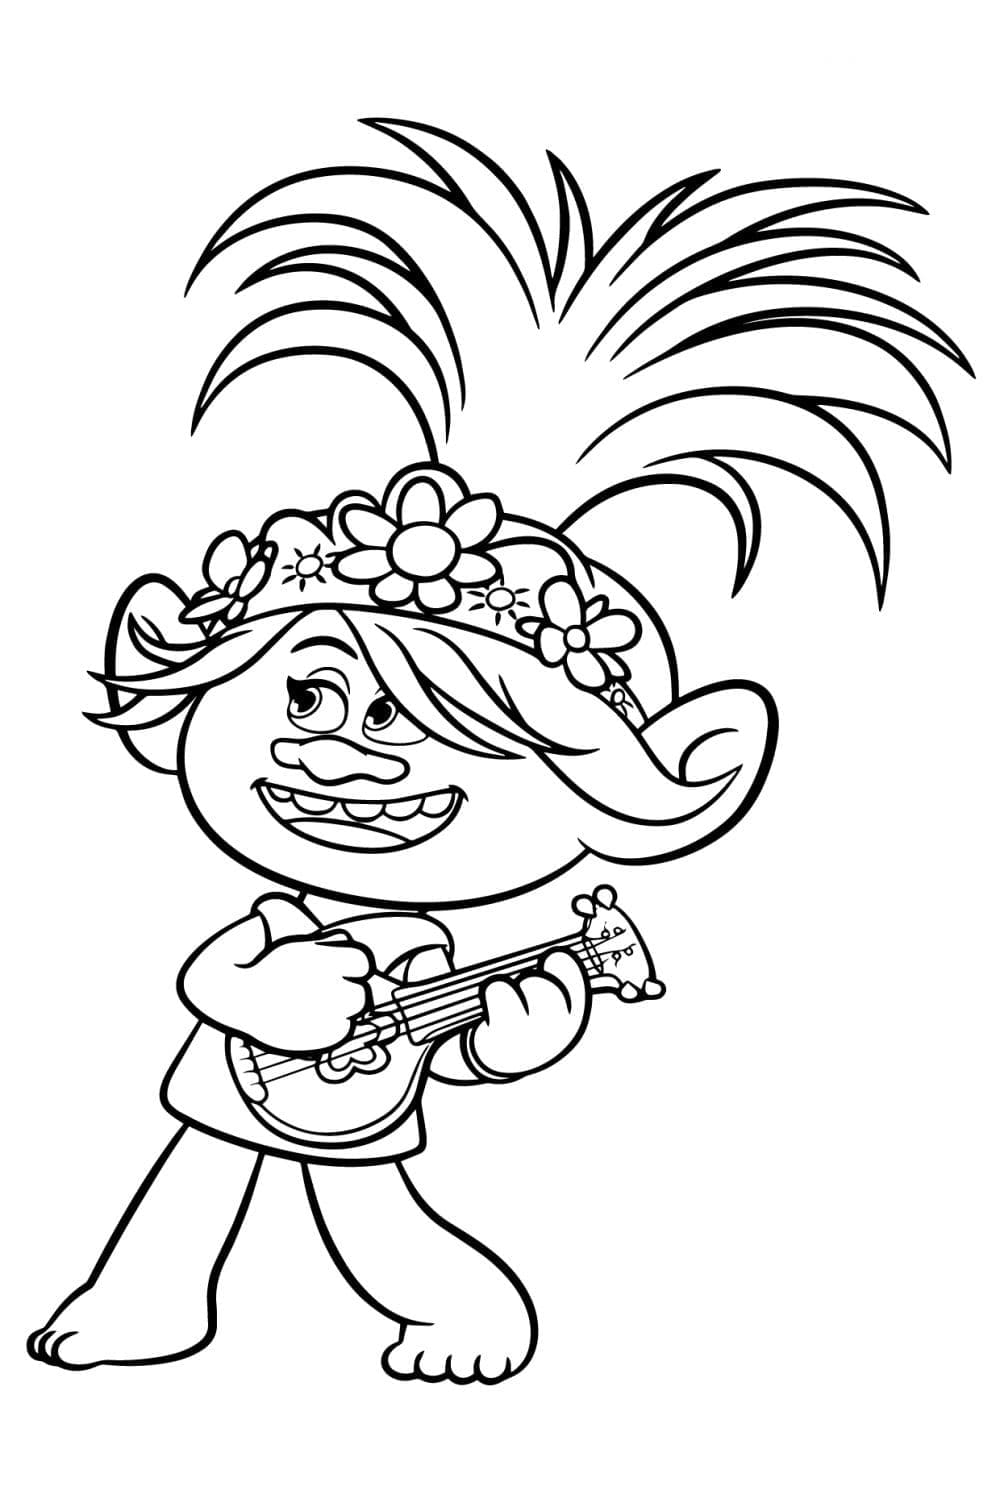 Cute poppy from trolls coloring page